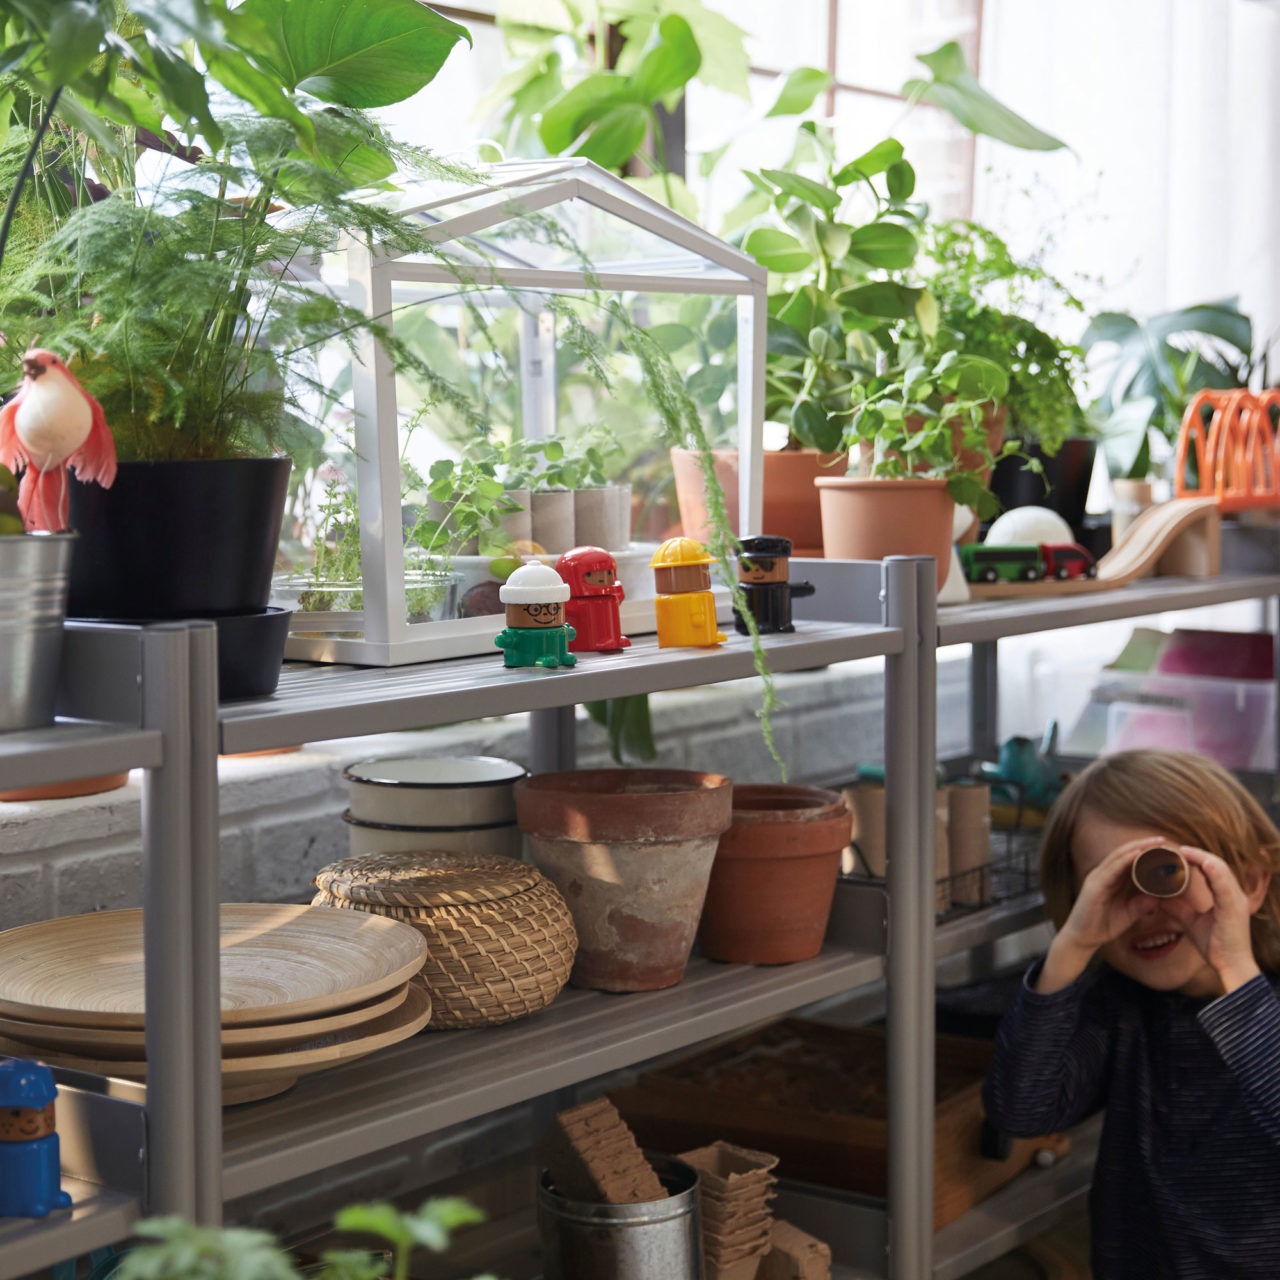 Next to shelves filled with verdant plants and planting accessories, a child stands looking through a paper roll.